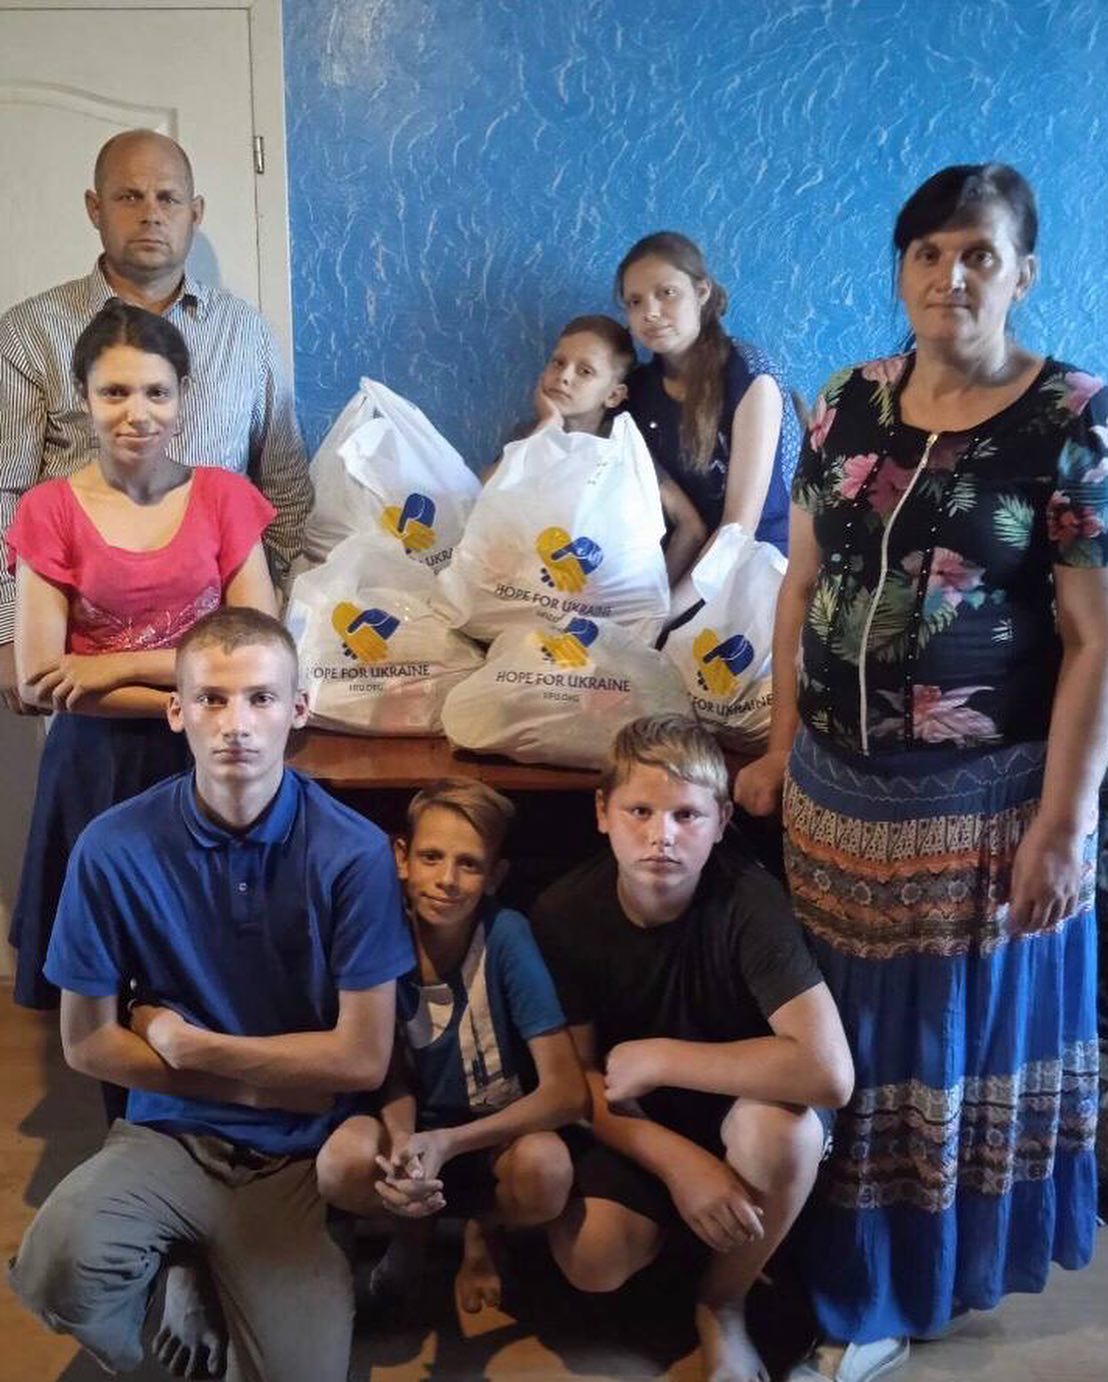 A group of people posing for a photo with bags of food.